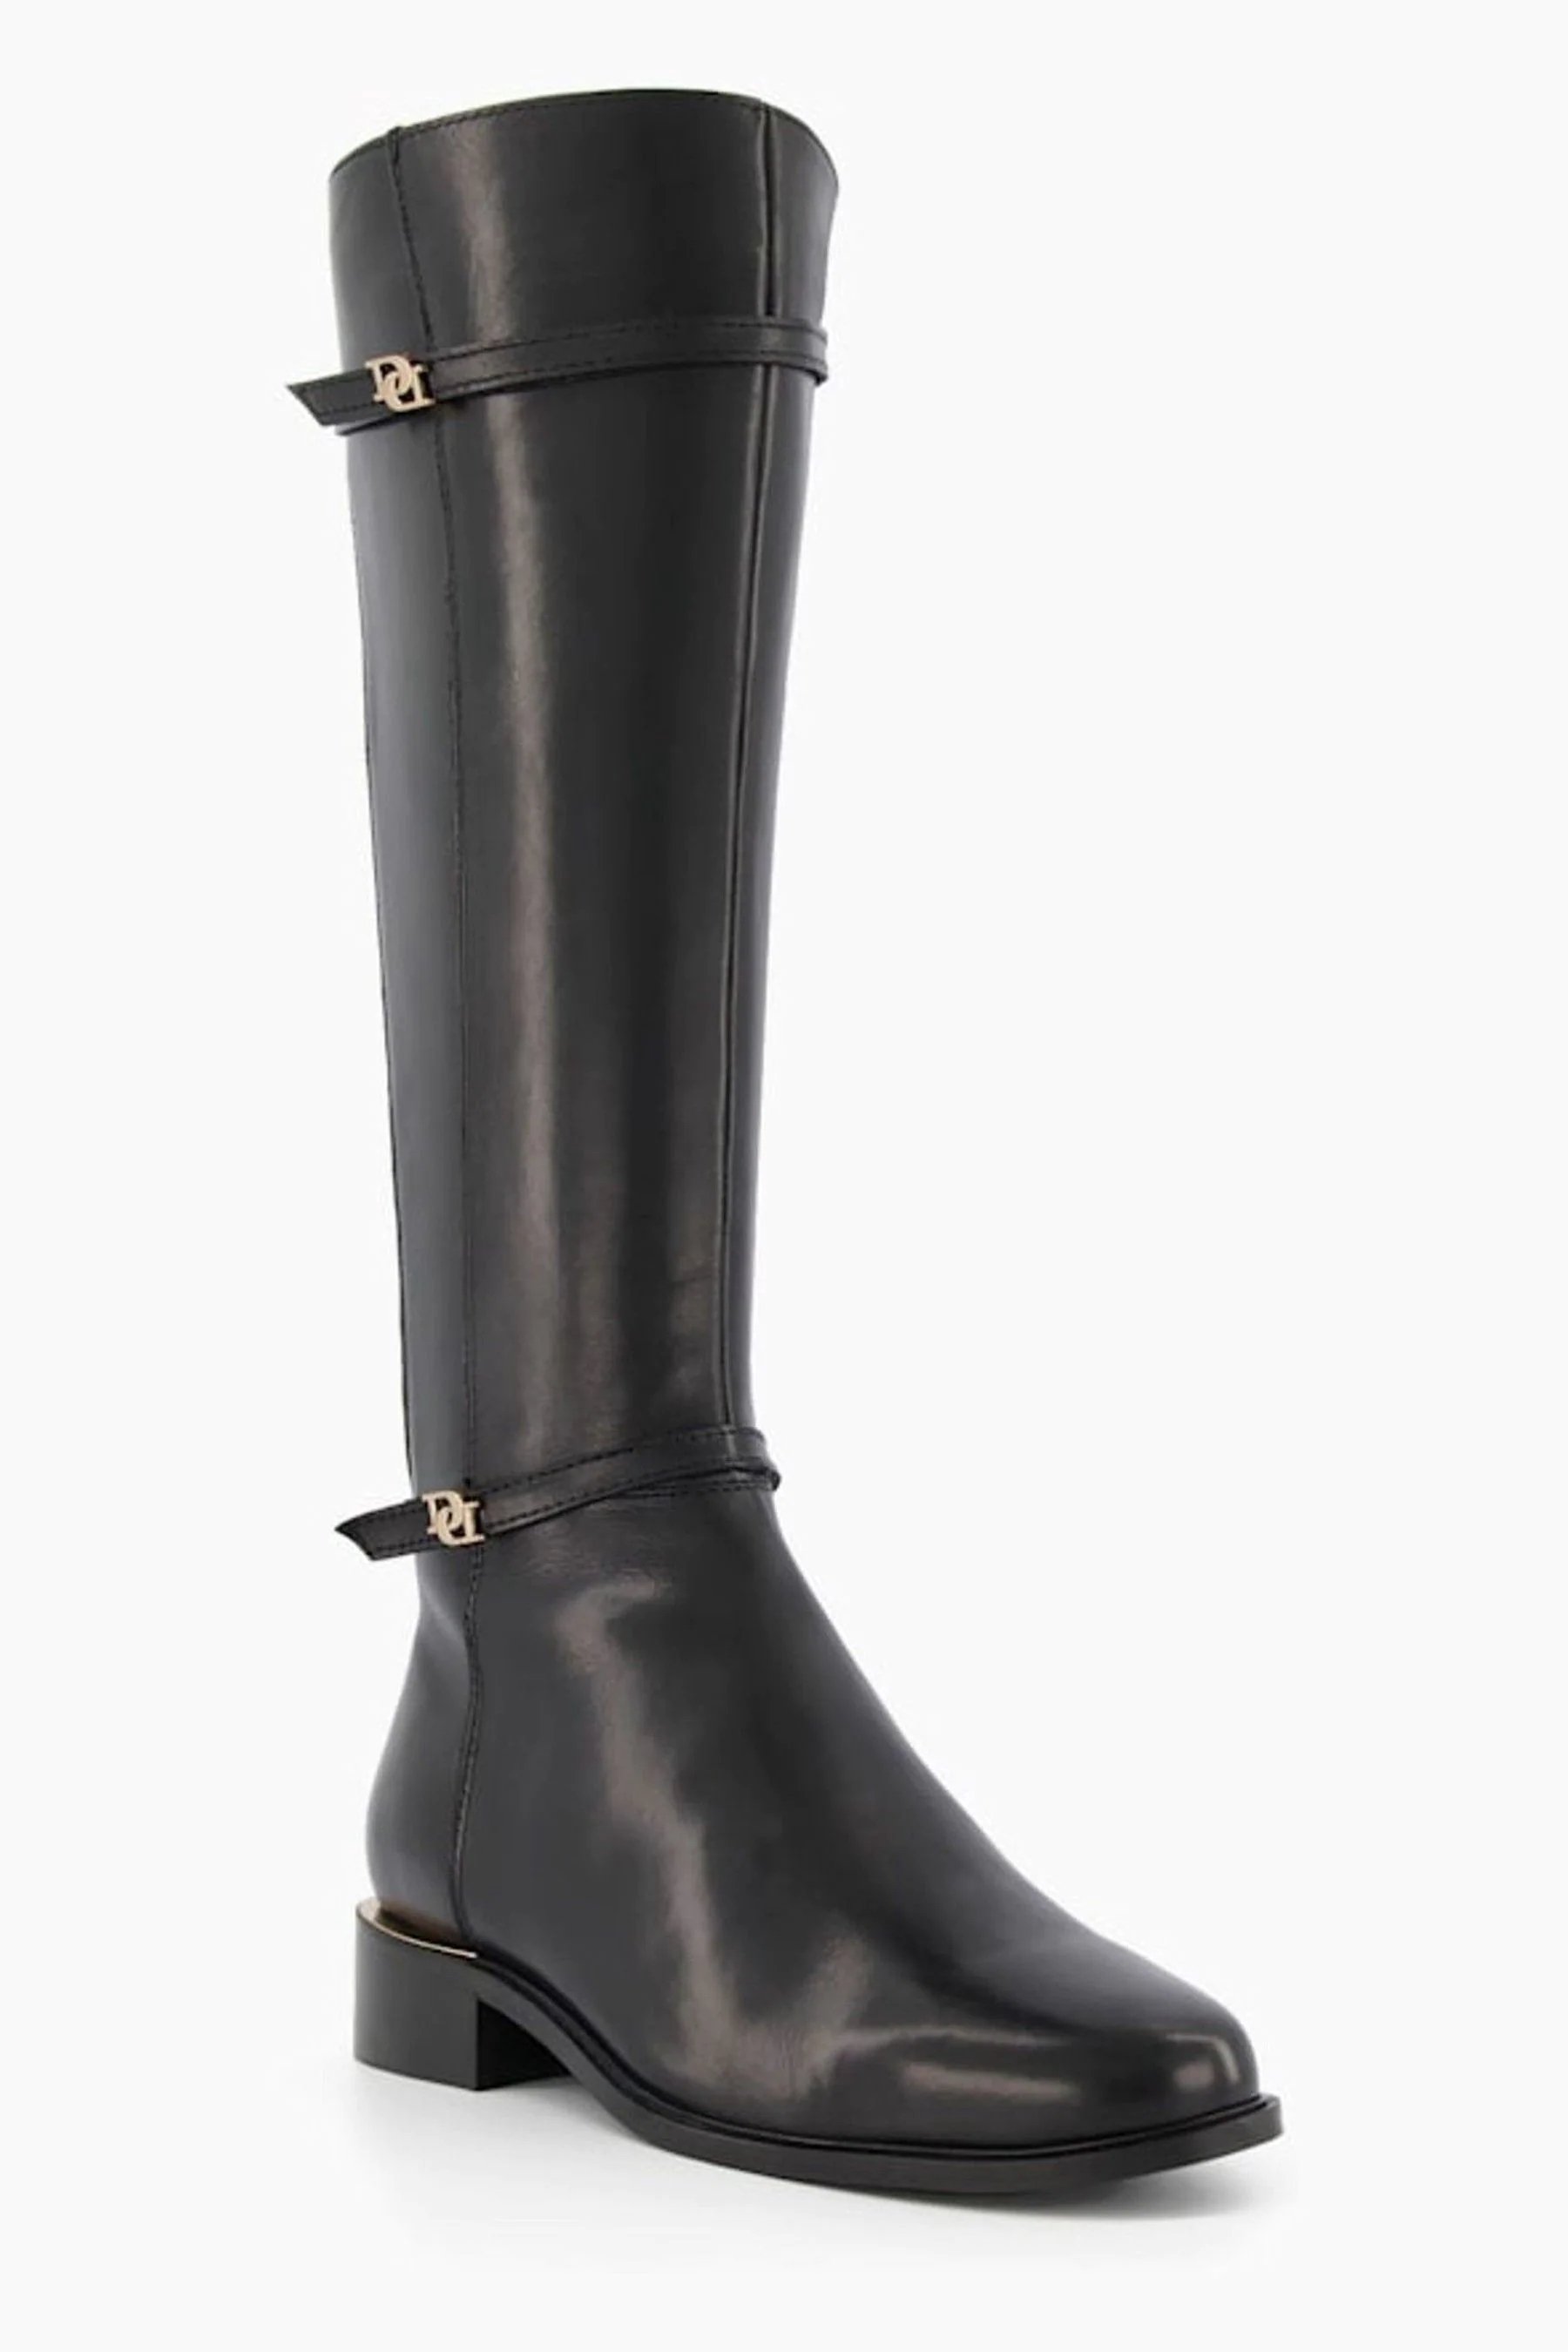 15 DUNE LONDON Double Buckle Riding Boots €195, 